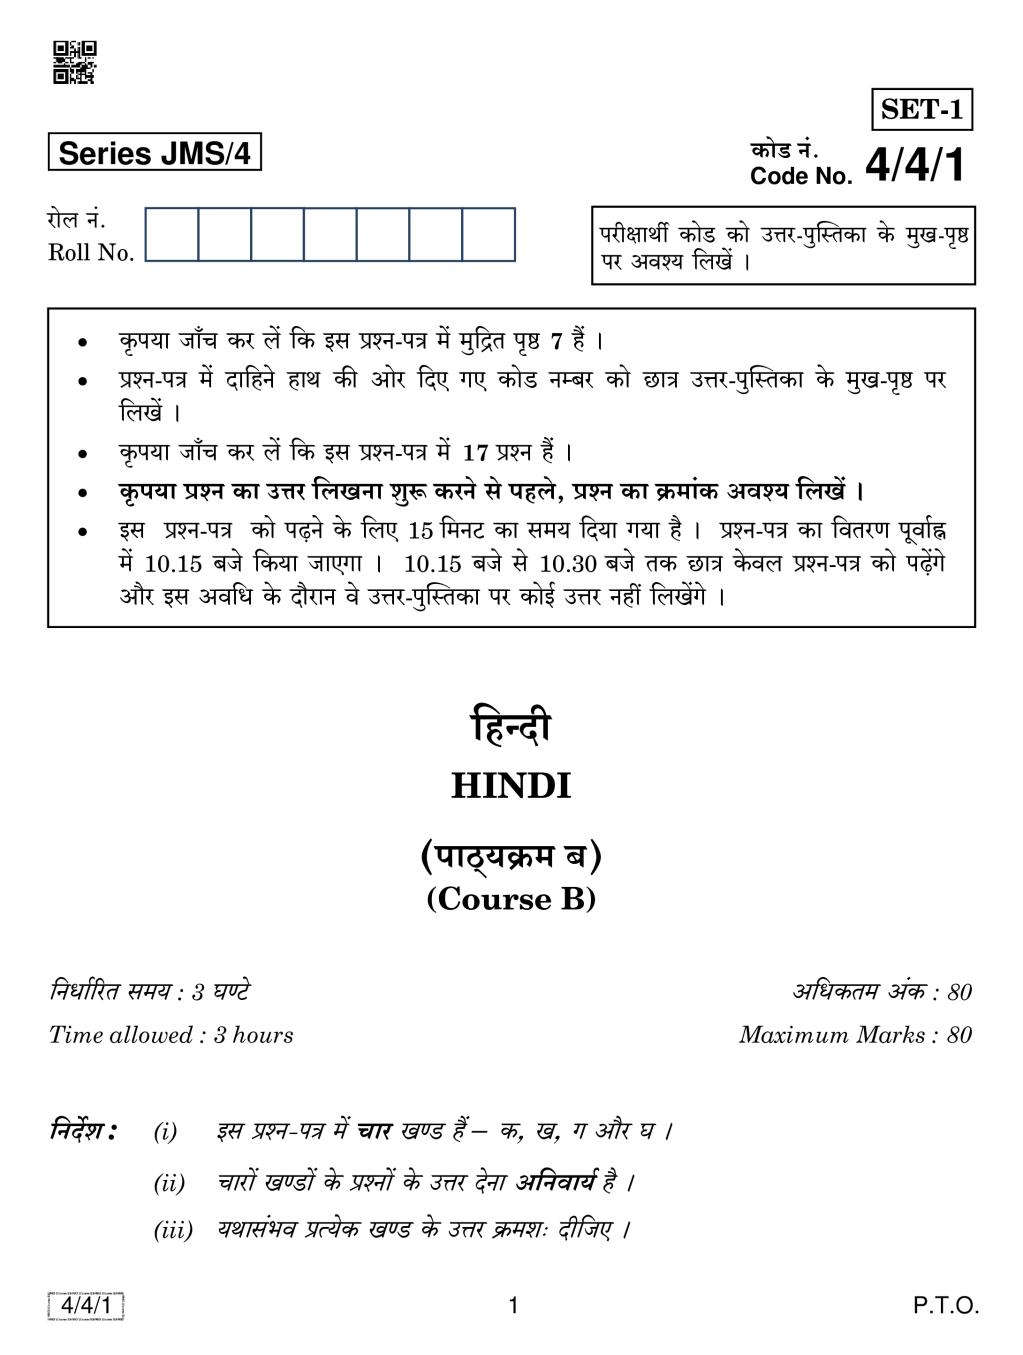 CBSE Class 10 Hindi Course B Question Paper 2019 Set 4 - Page 1